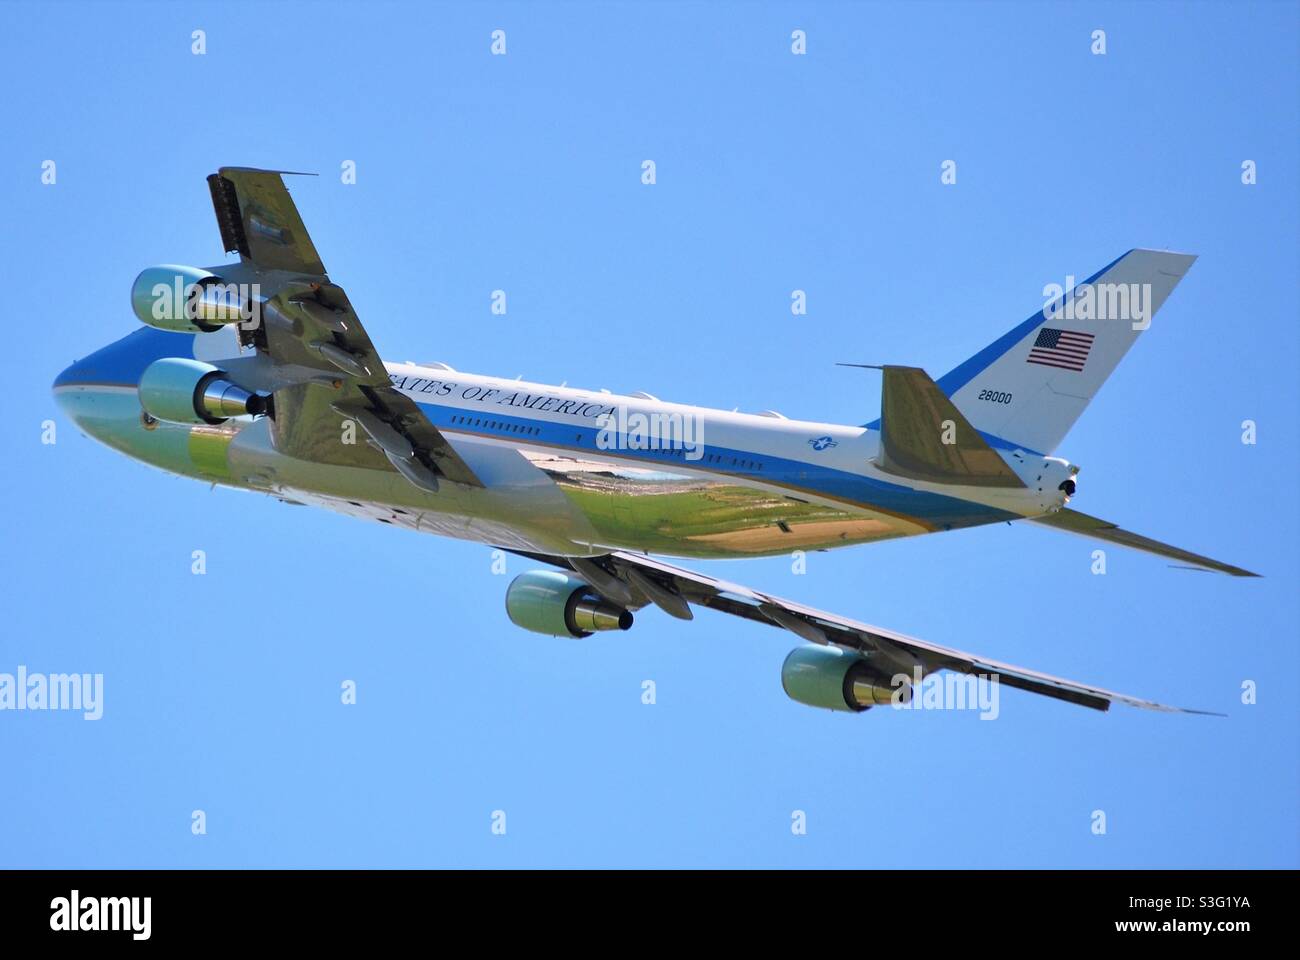 G7 Summit Cornwall: Air Force One taking off from Newquay Airport. Airplane climbing into the blue sky. Stock Photo